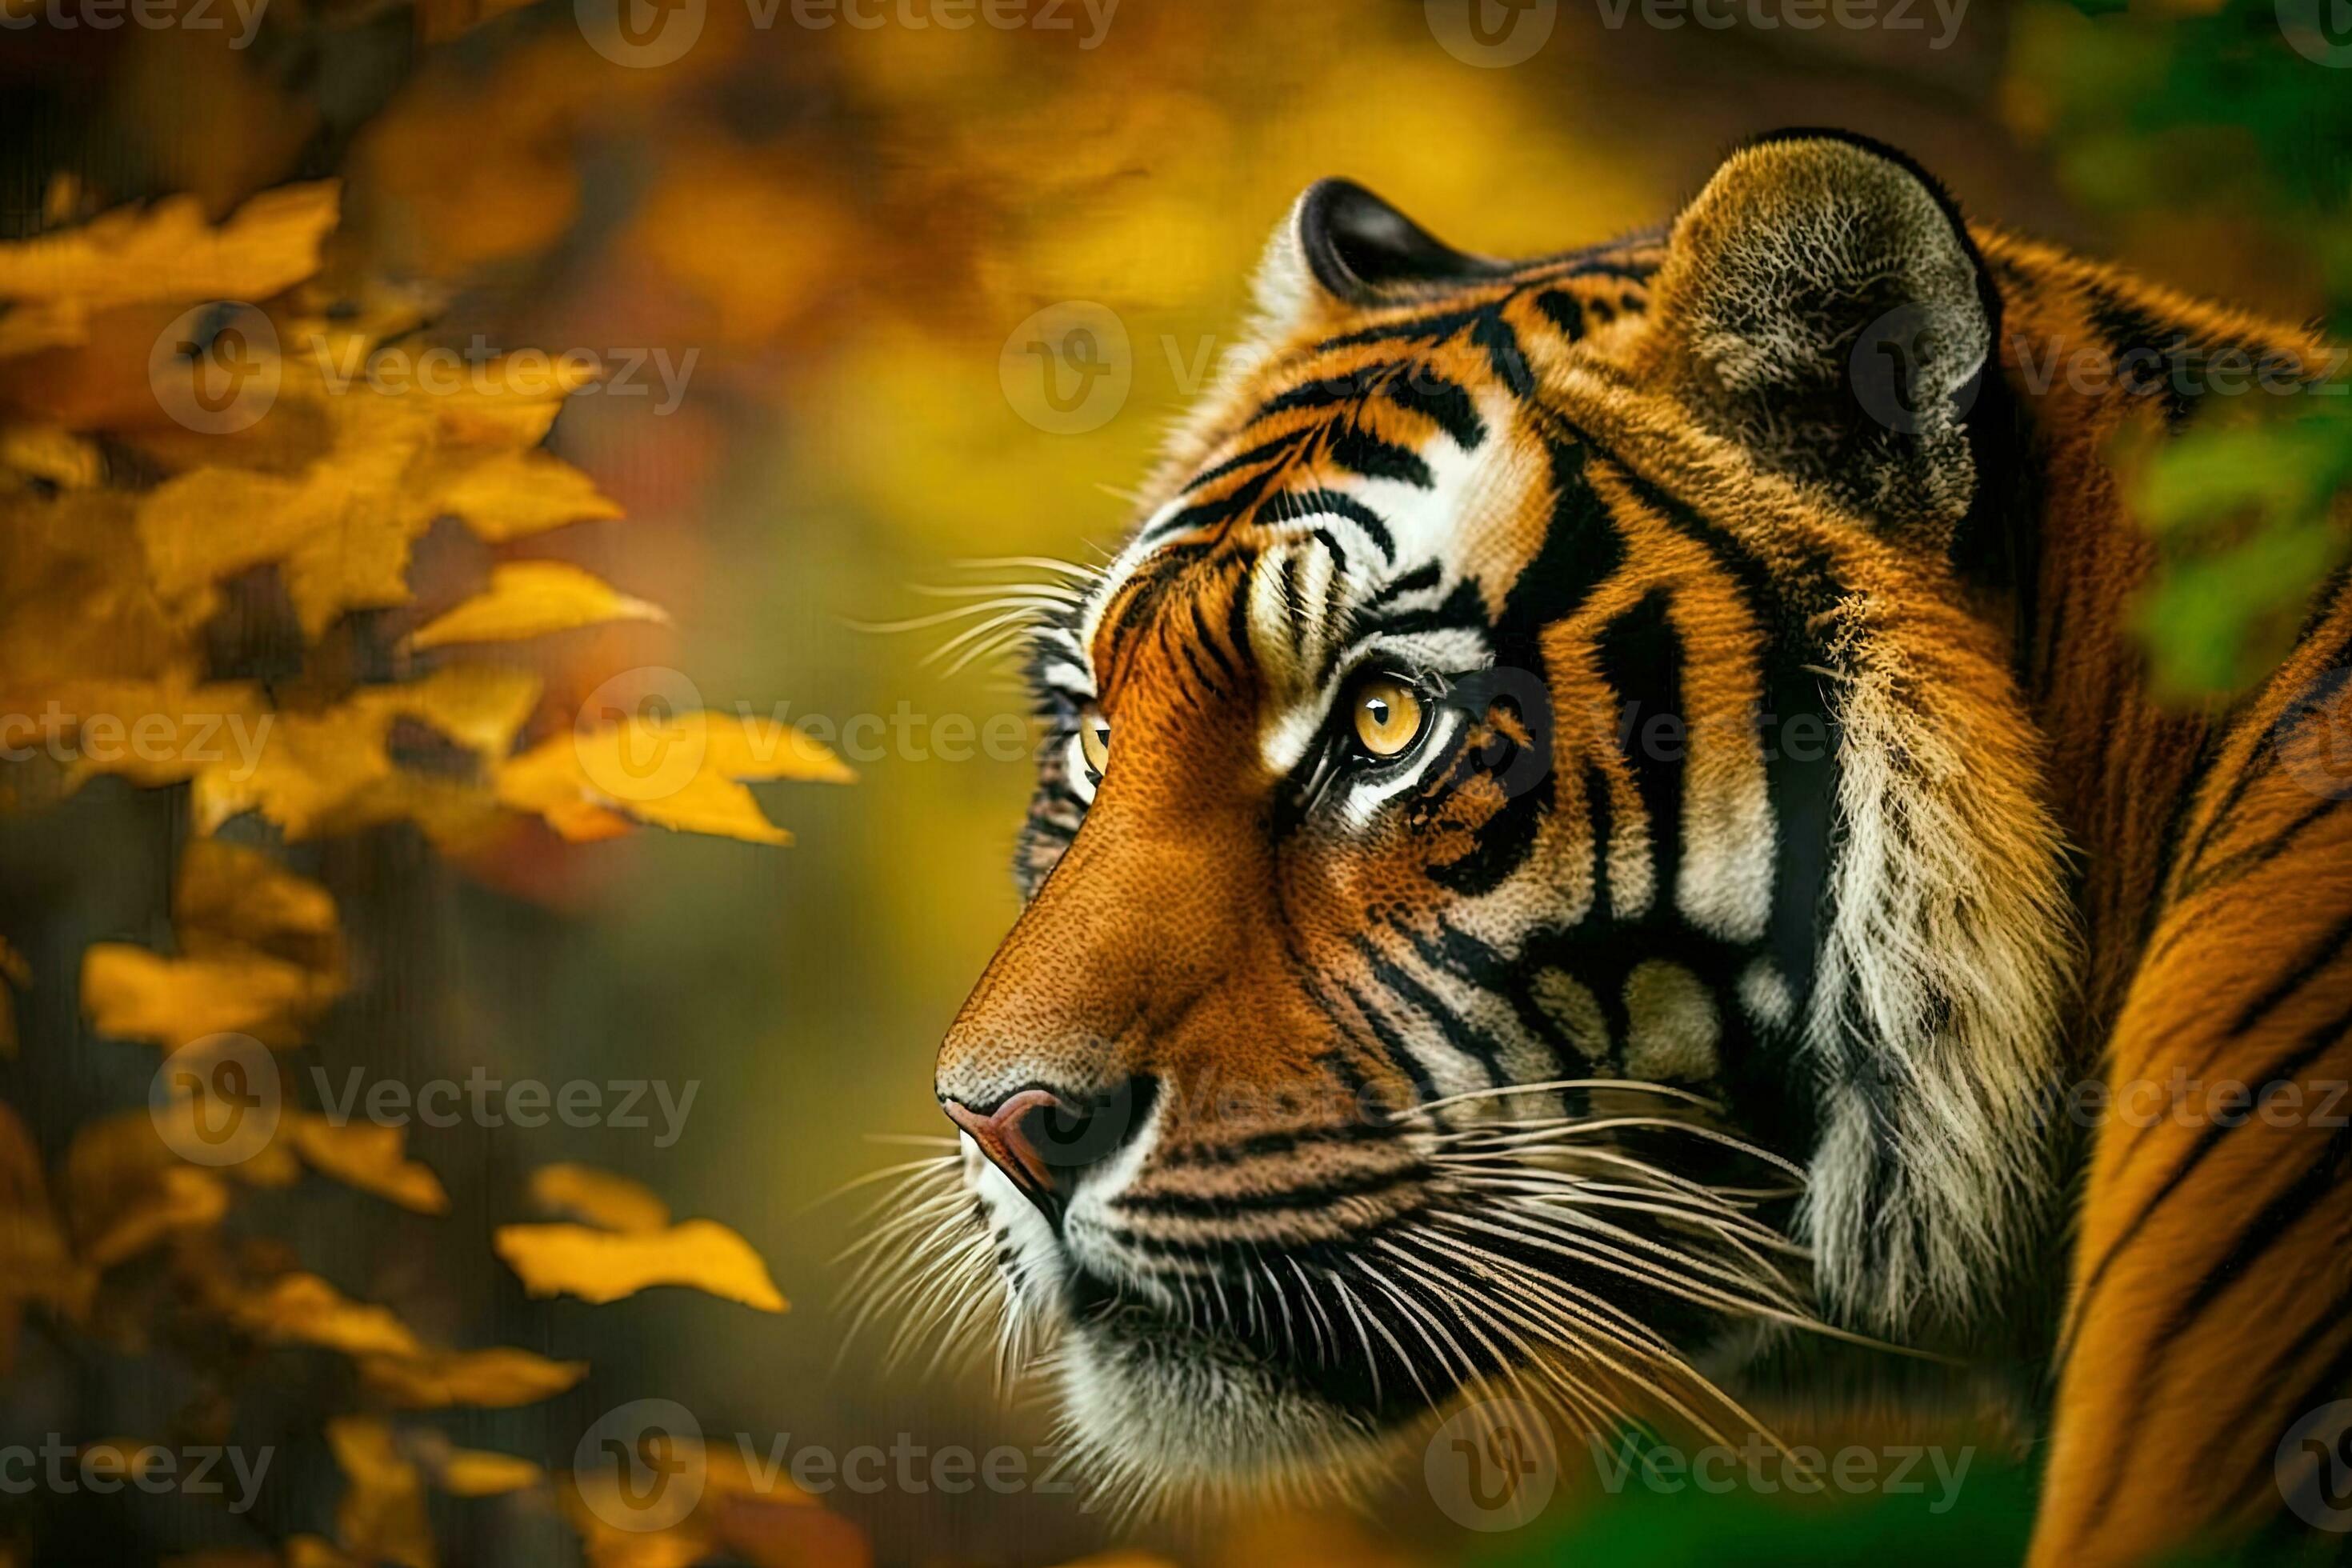 Bengal Tiger - A wild yet gorgeous animal - Dreamstime